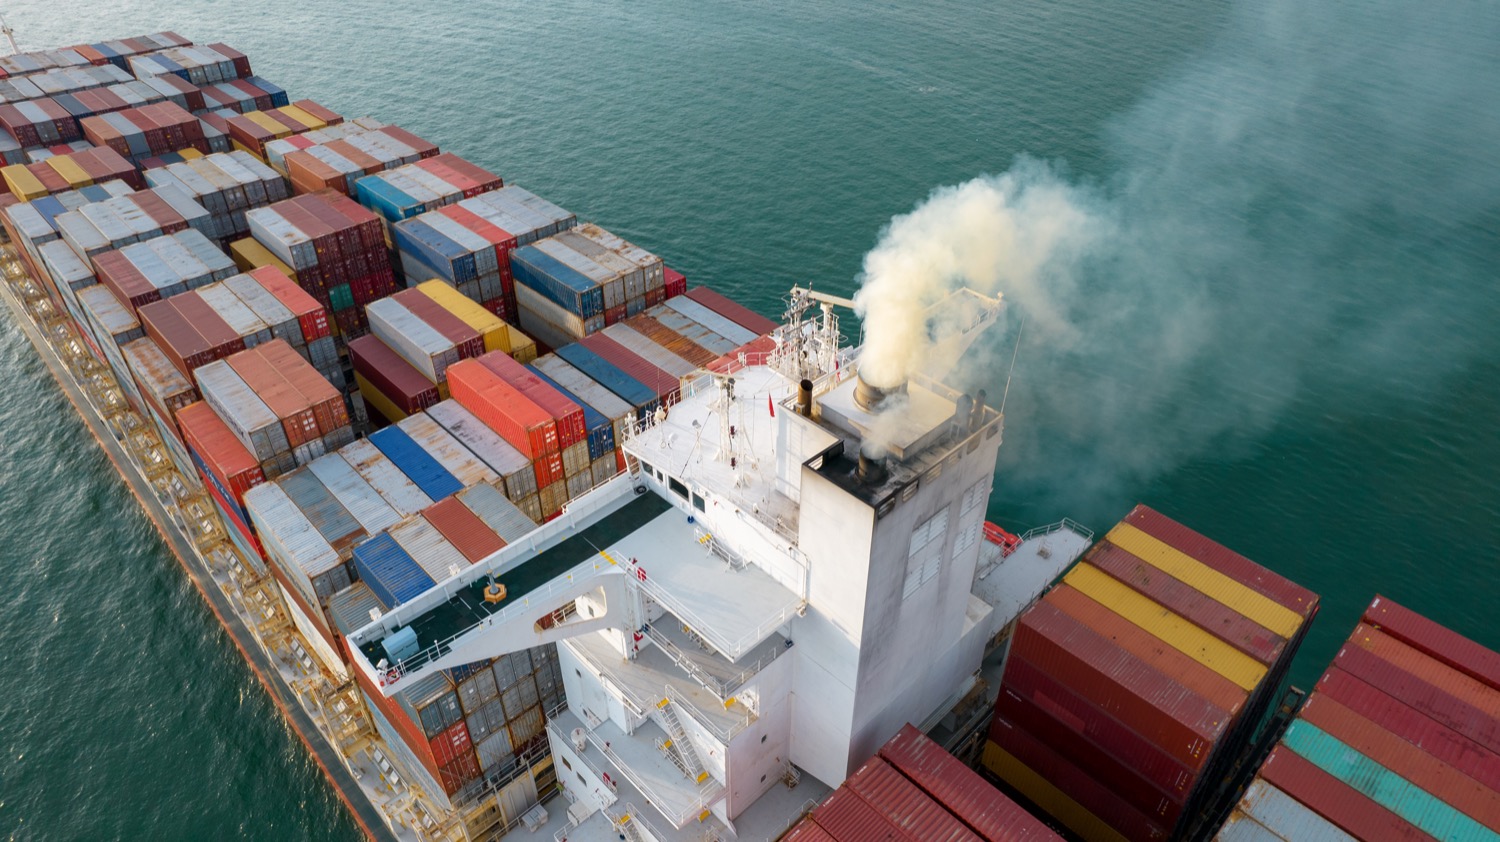 an aerial shot above a container ship loaded with containers on the ocean. its smoke stack emits smoke exhaust